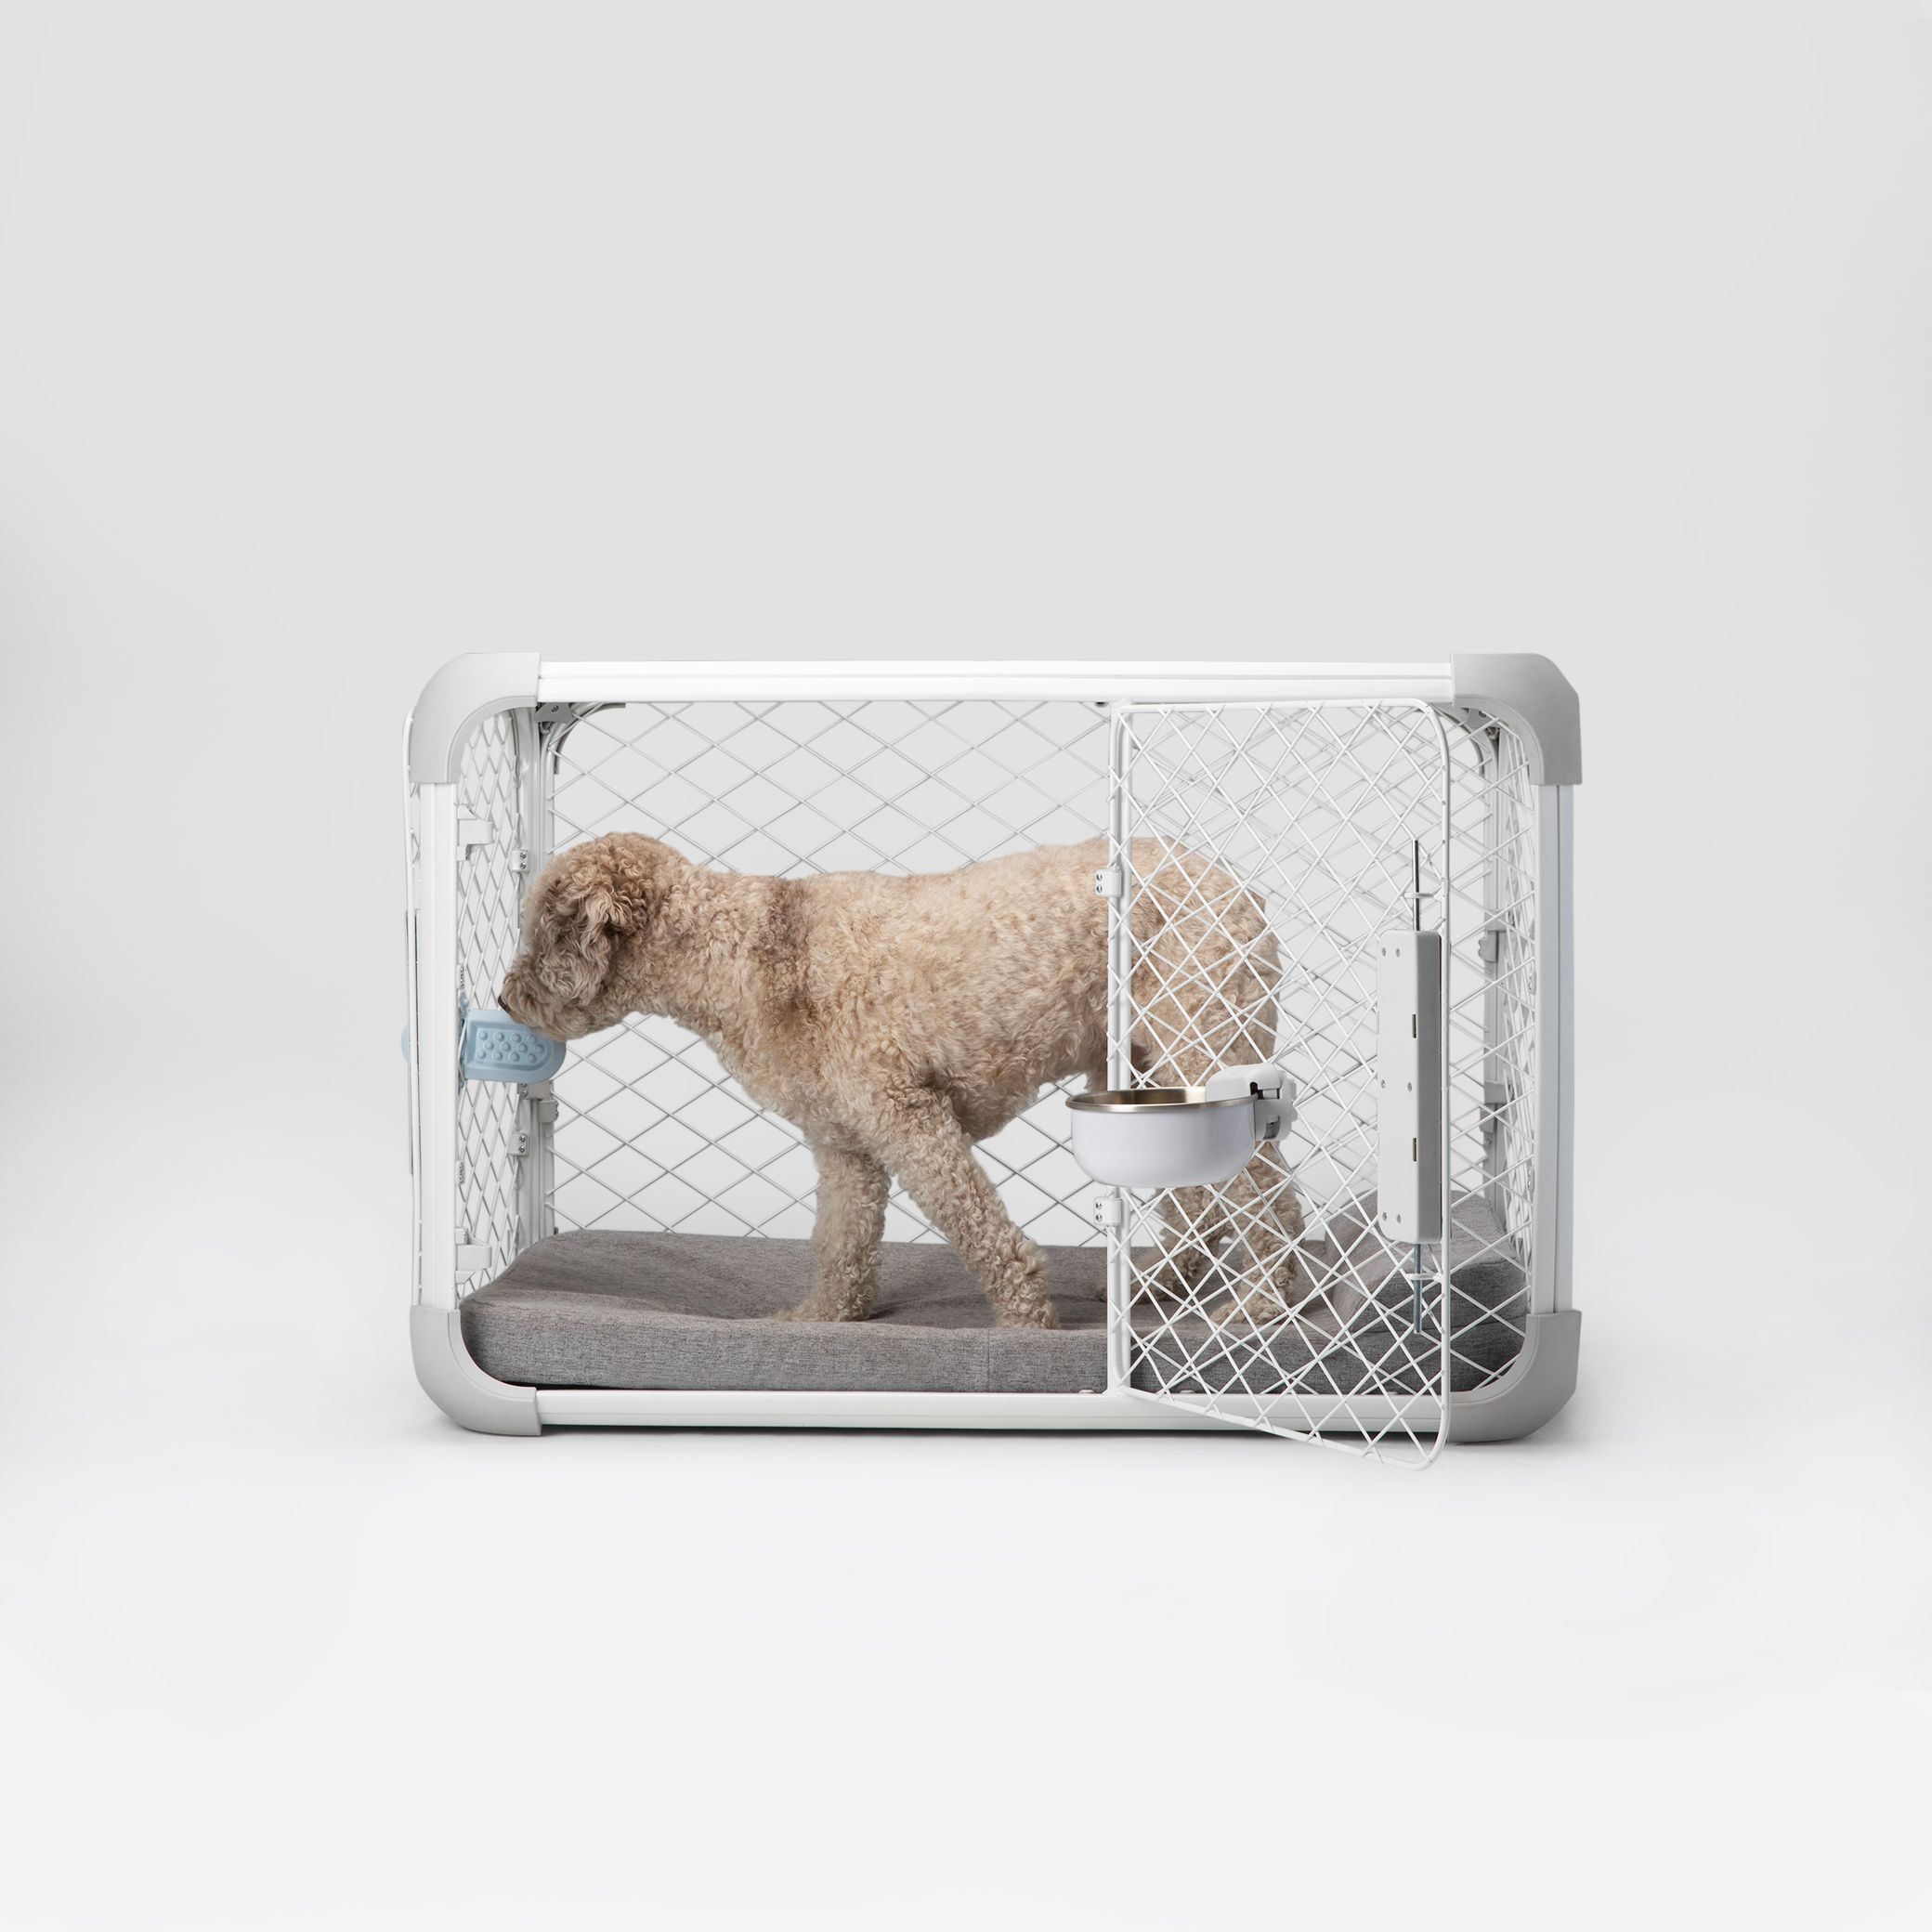 Side view of dog inside of Evolv Dog Crate with open side door. Diggs Crate Bowl, Groov Training Aid, and Bolstr Dog Bed are in use inside the crate.